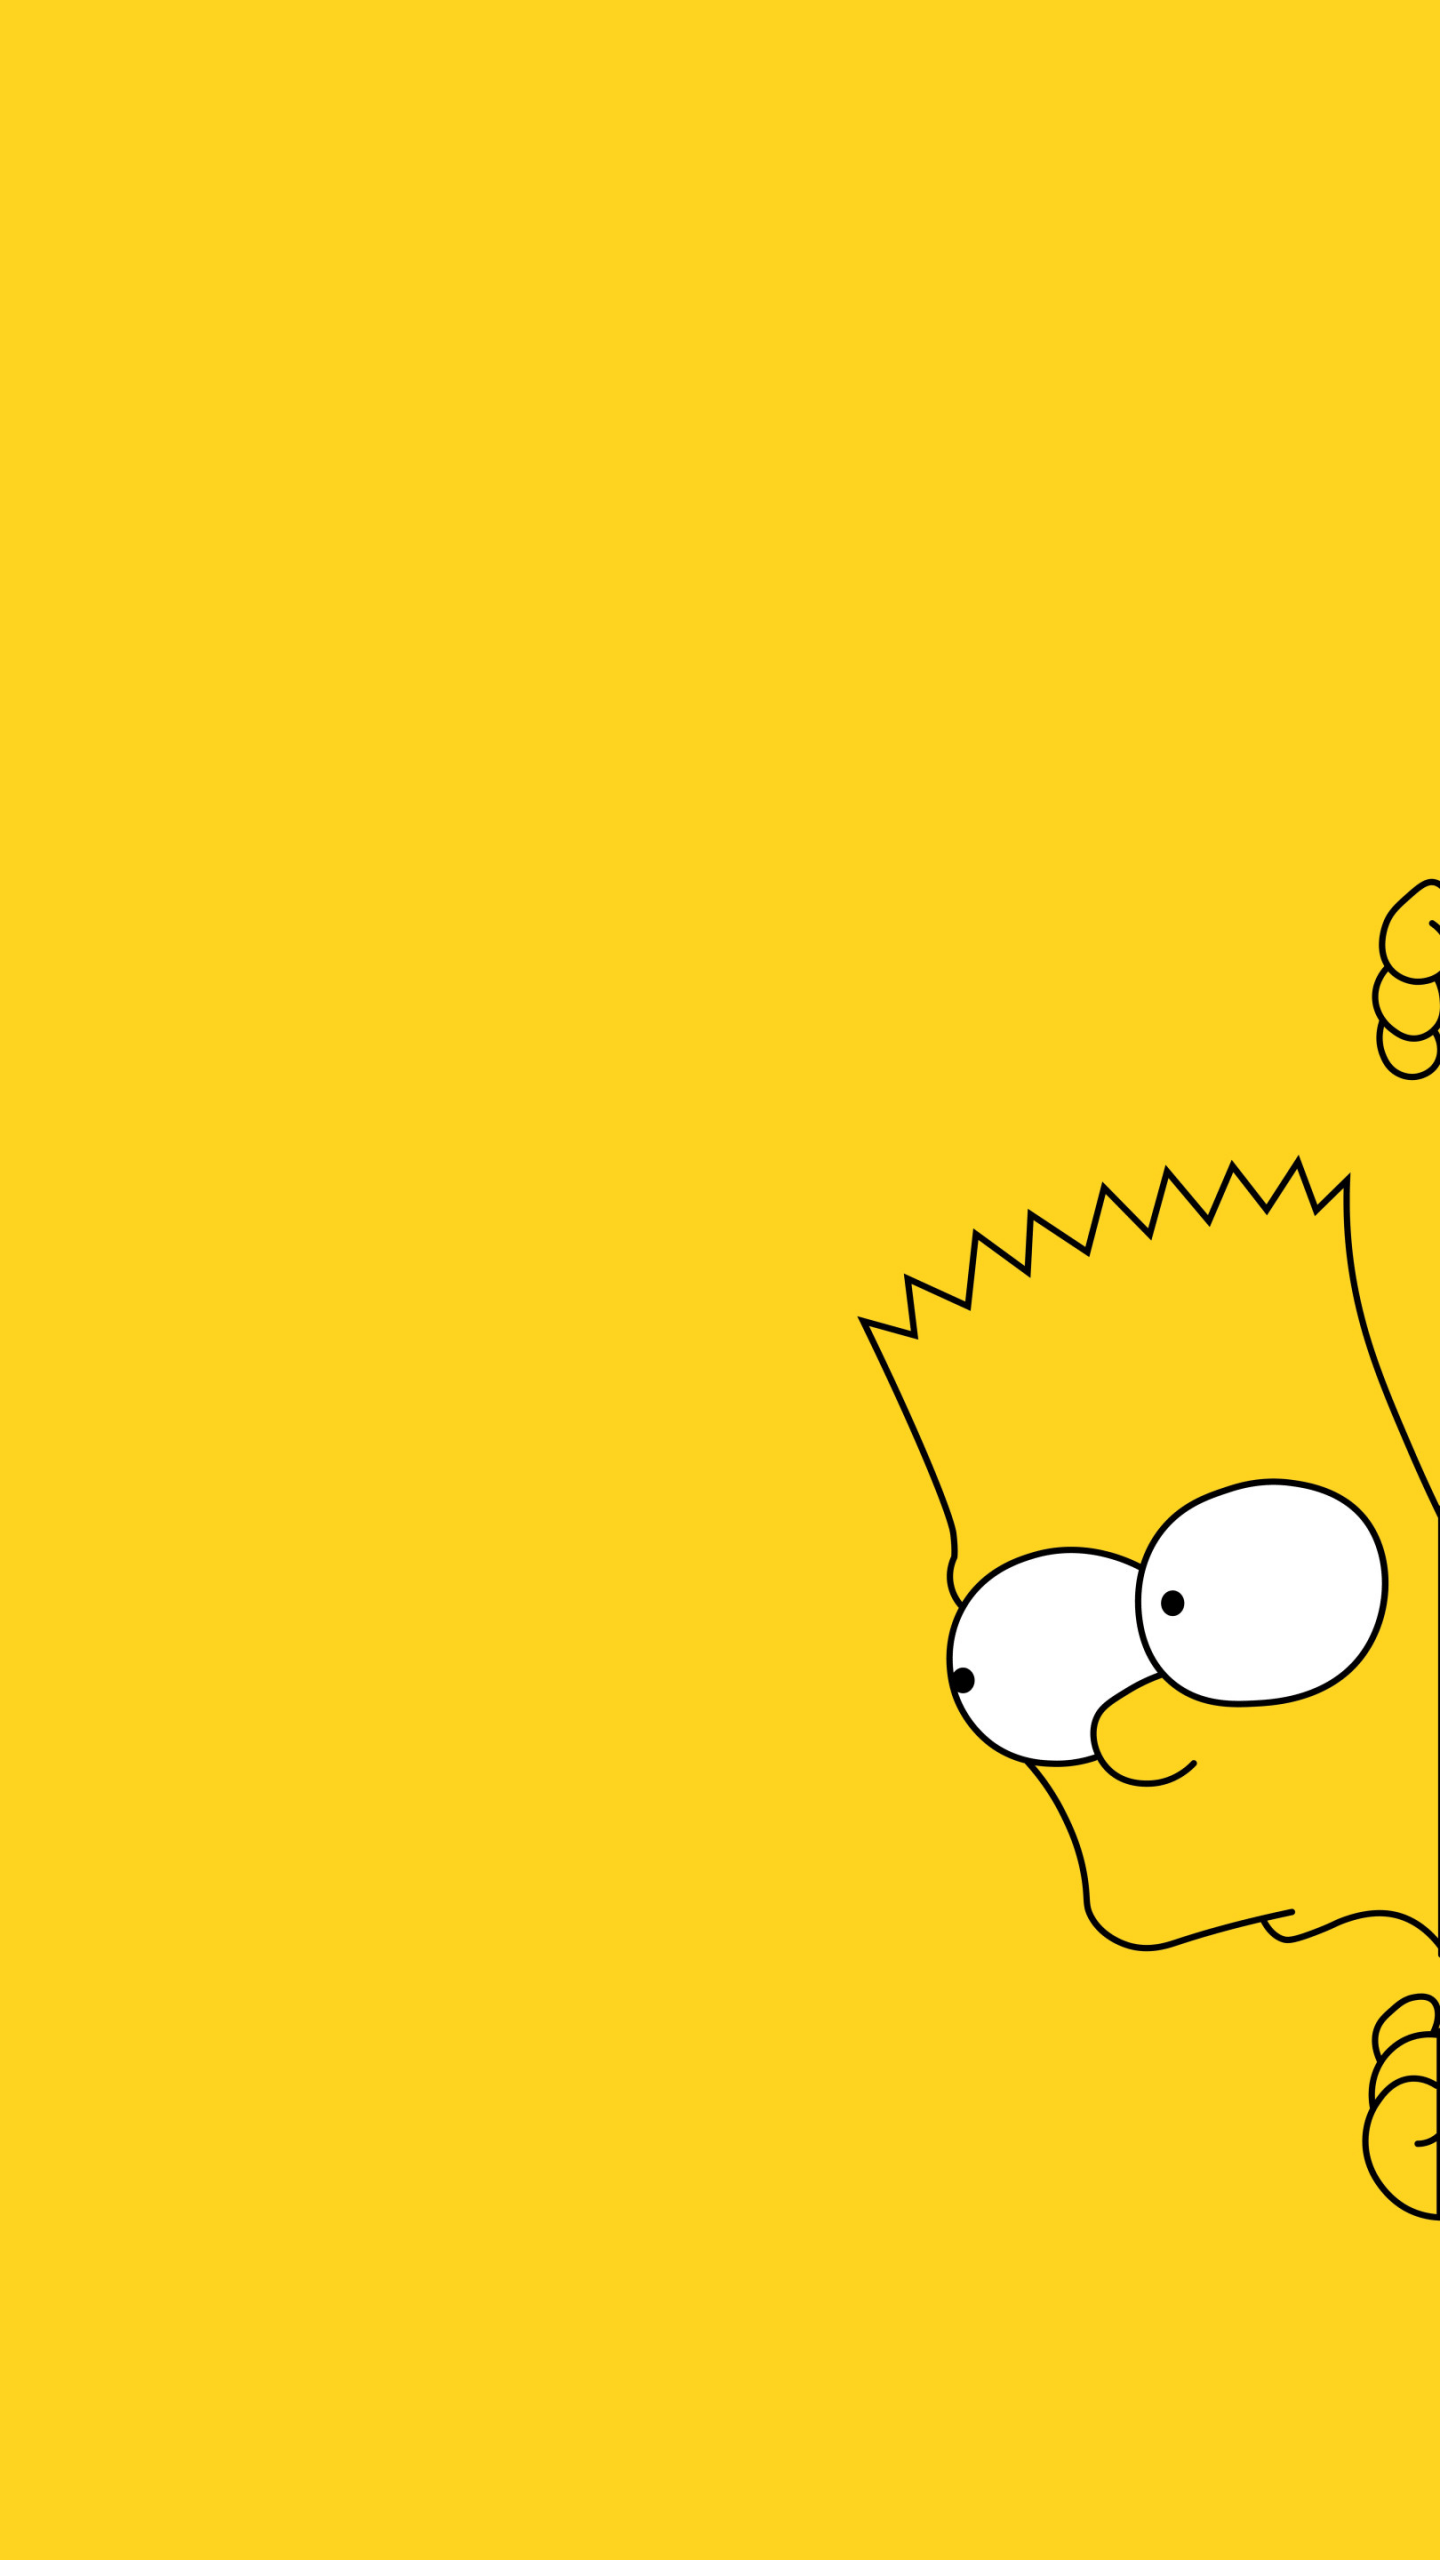 Bart Simpson wallpaper for iPhone with high-resolution 1080x1920 pixel. You can use this wallpaper for your iPhone 5, 6, 7, 8, X, XS, XR backgrounds, Mobile Screensaver, or iPad Lock Screen - The Simpsons